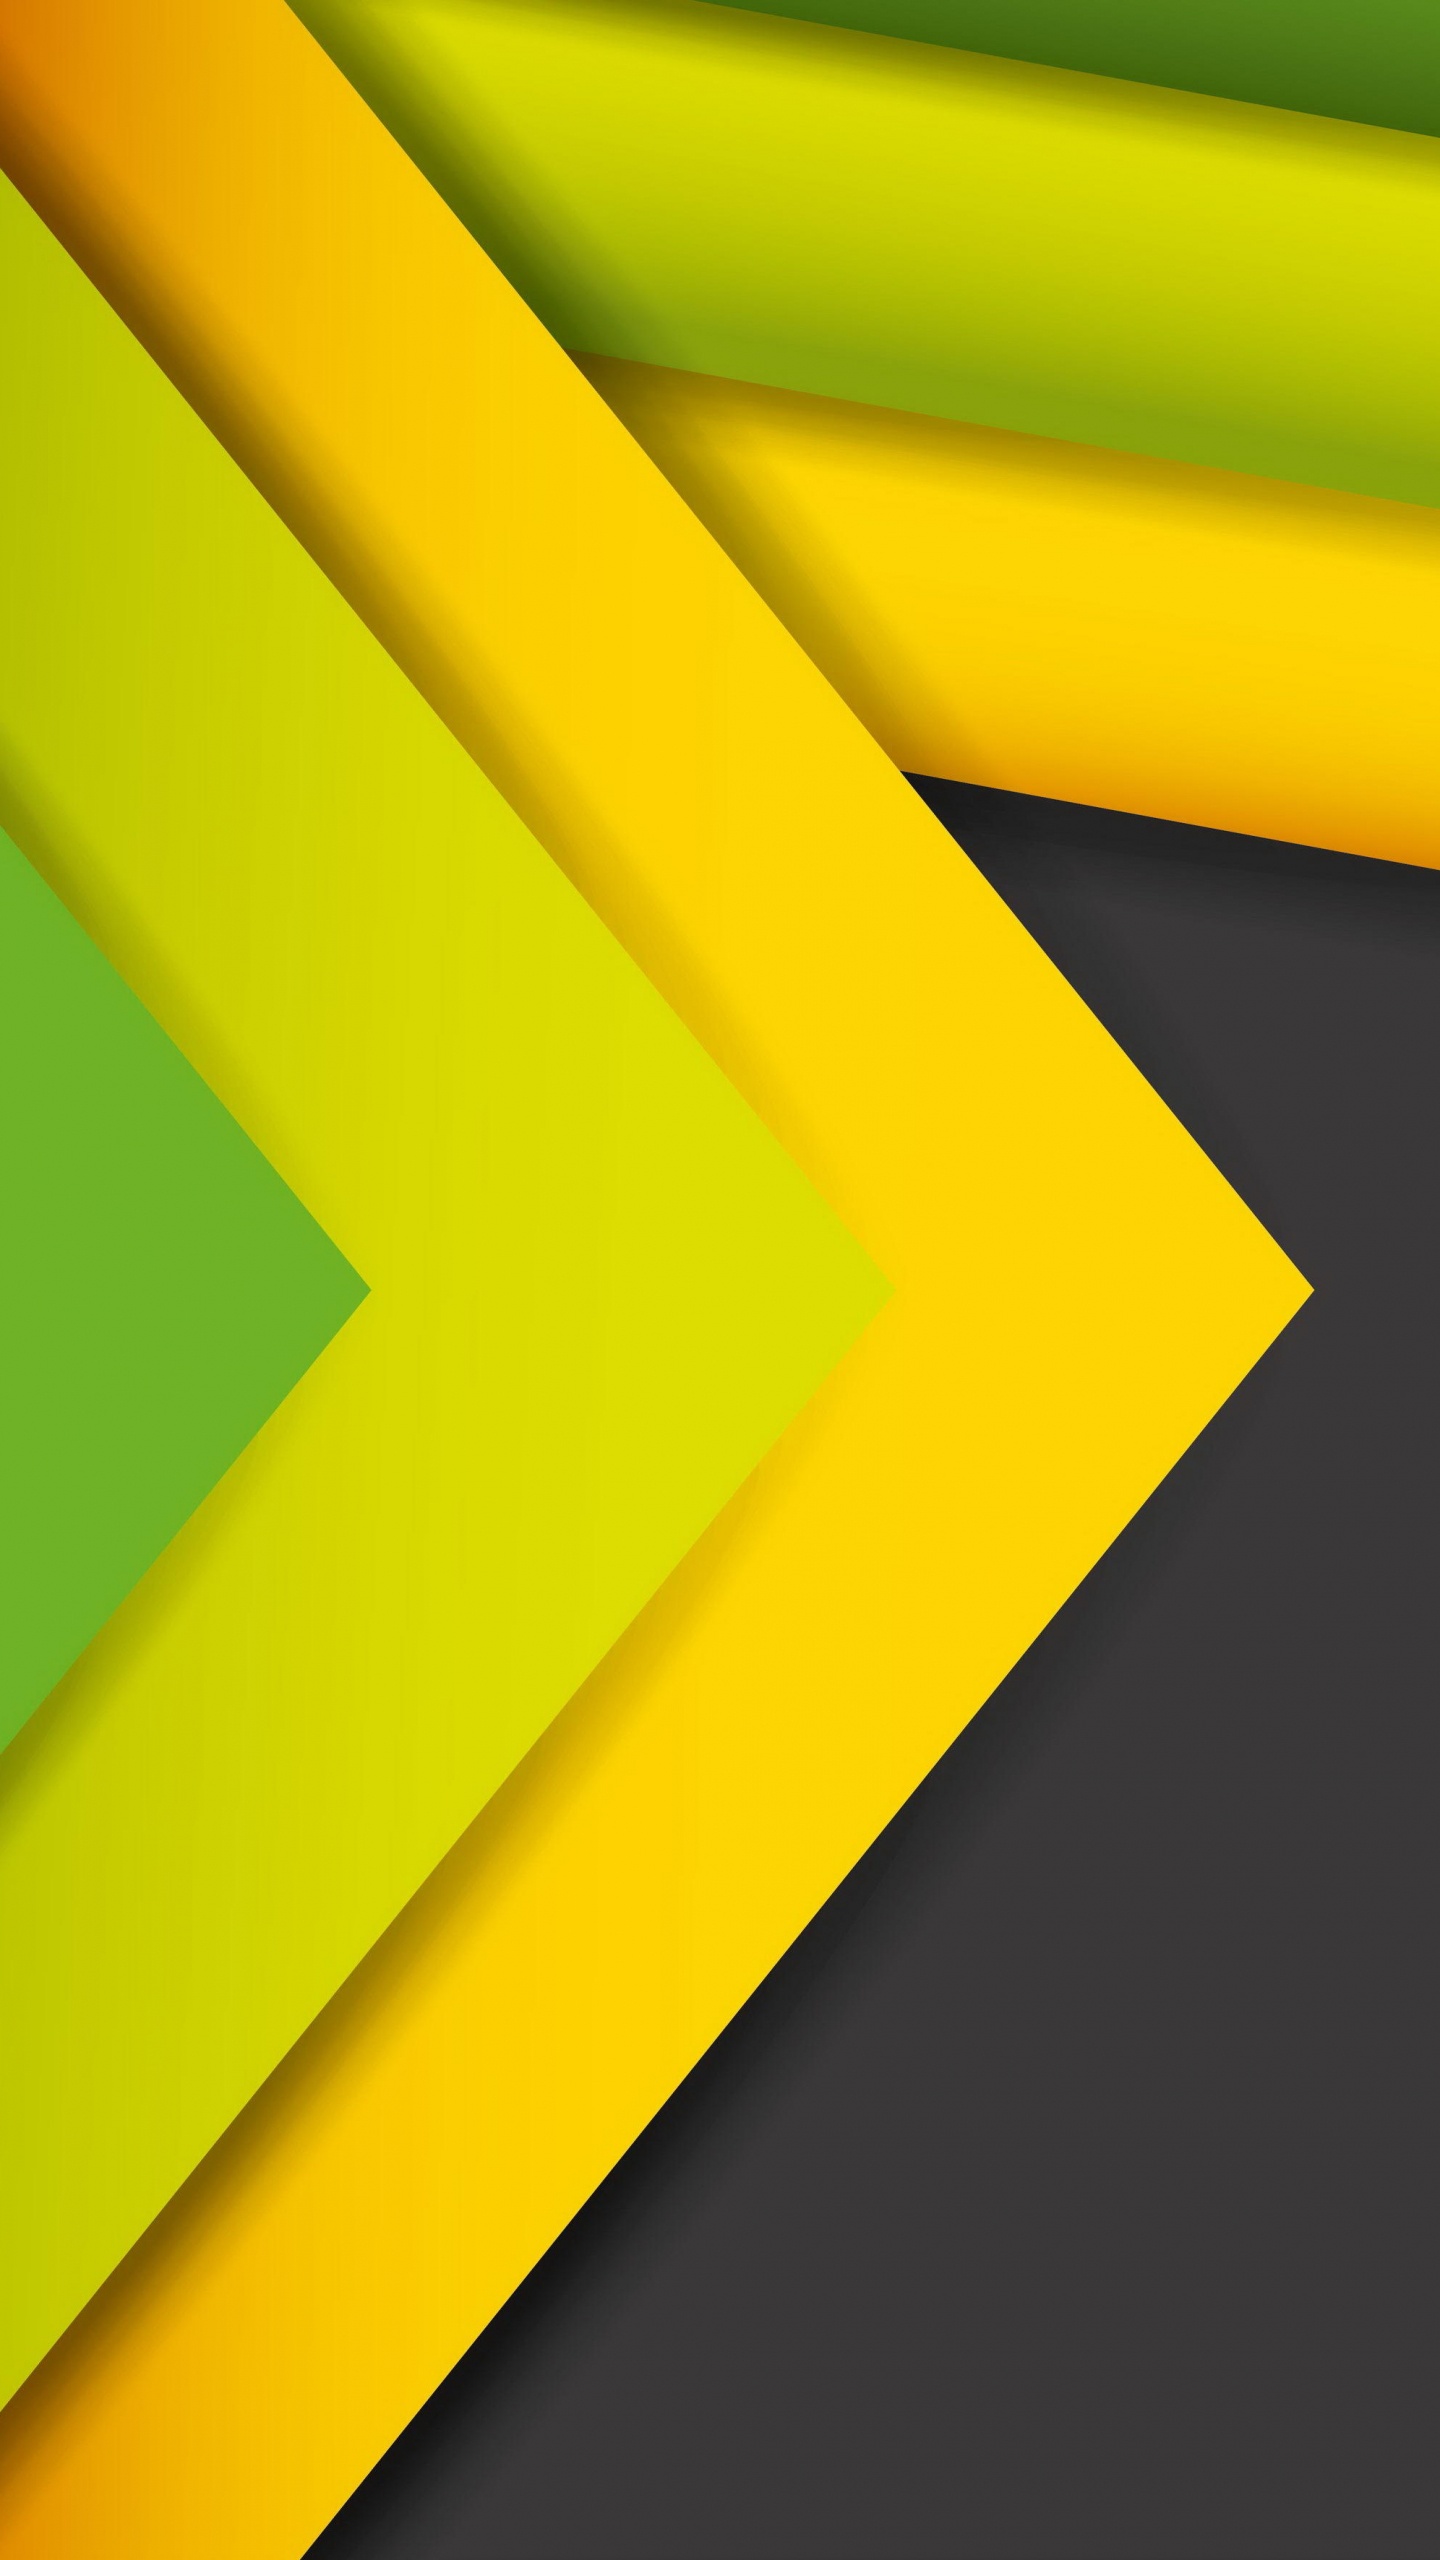 Yellow and Green Triangle Illustration. Wallpaper in 1440x2560 Resolution